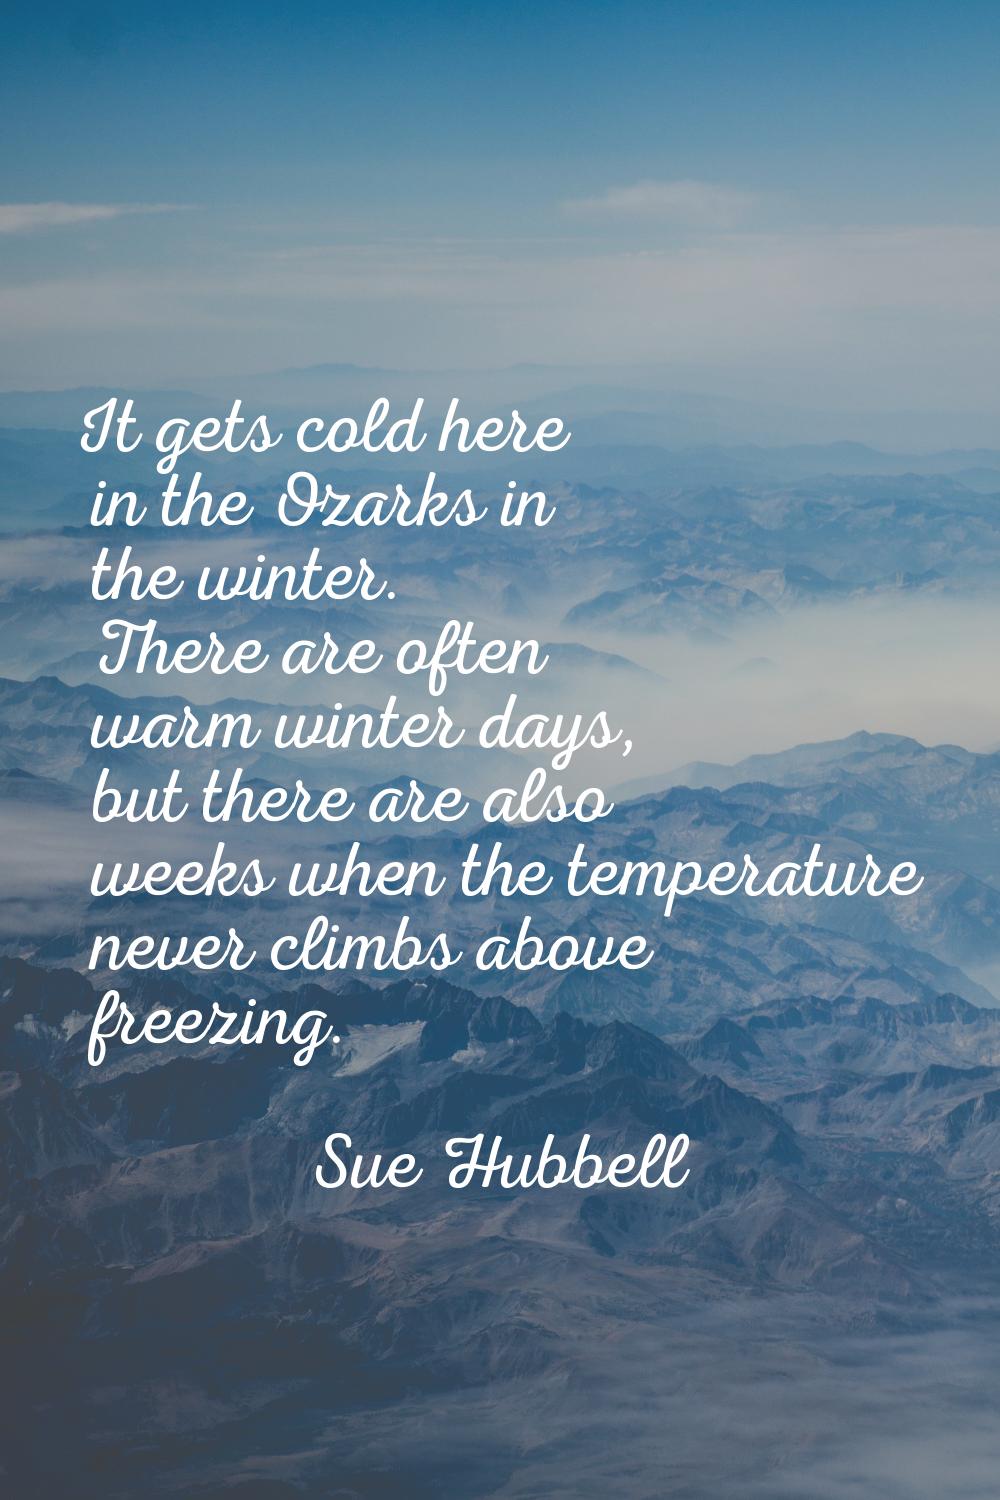 It gets cold here in the Ozarks in the winter. There are often warm winter days, but there are also